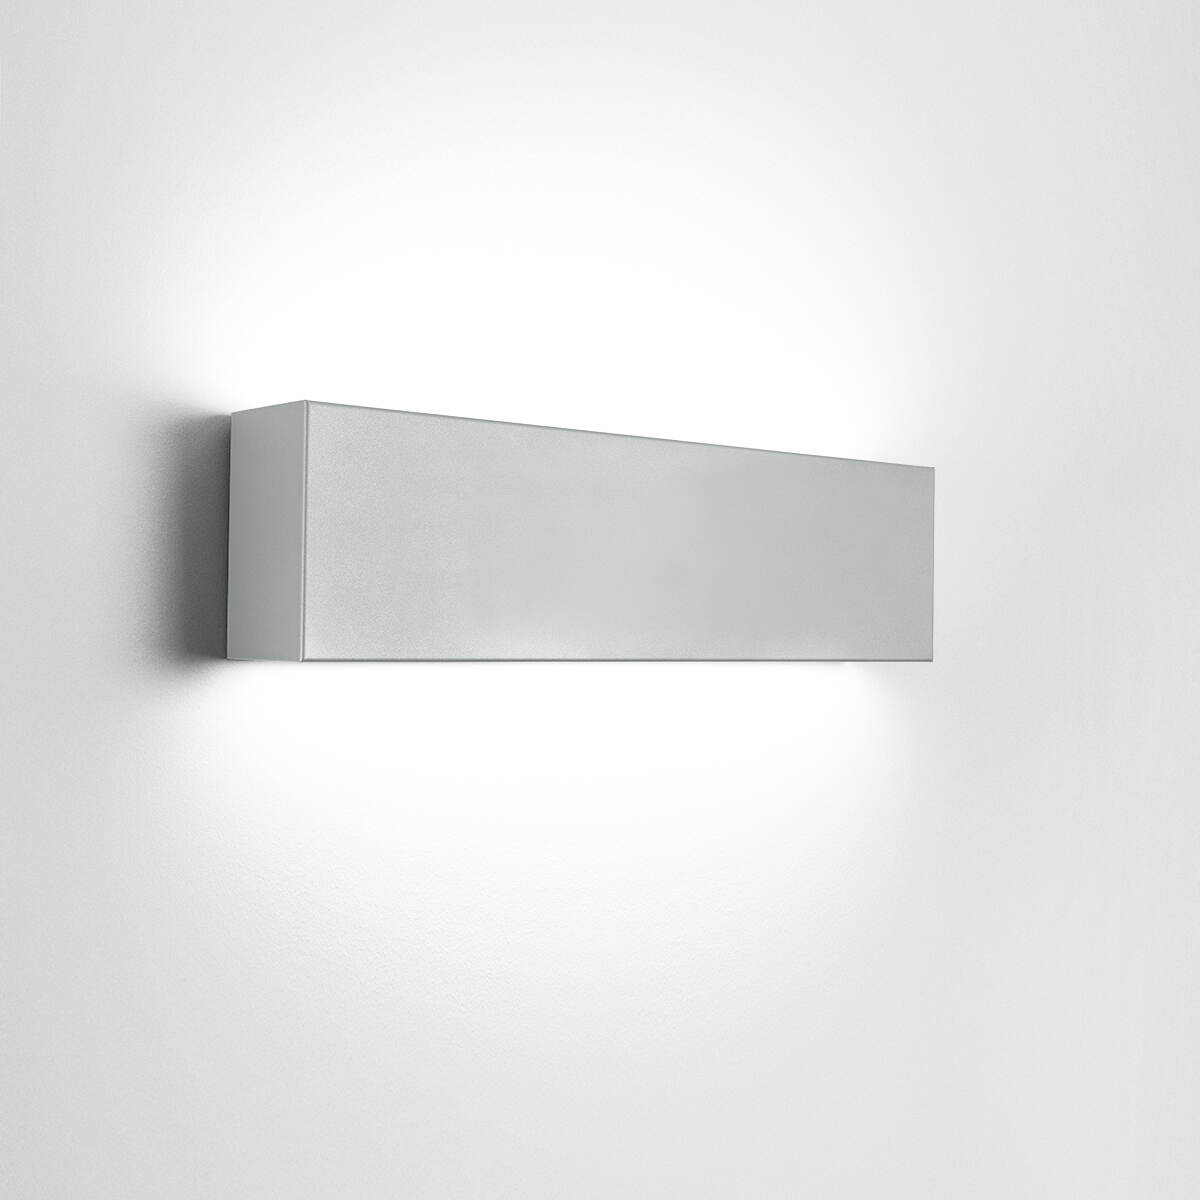 A box-like linear wall sonce with uplight and downlight